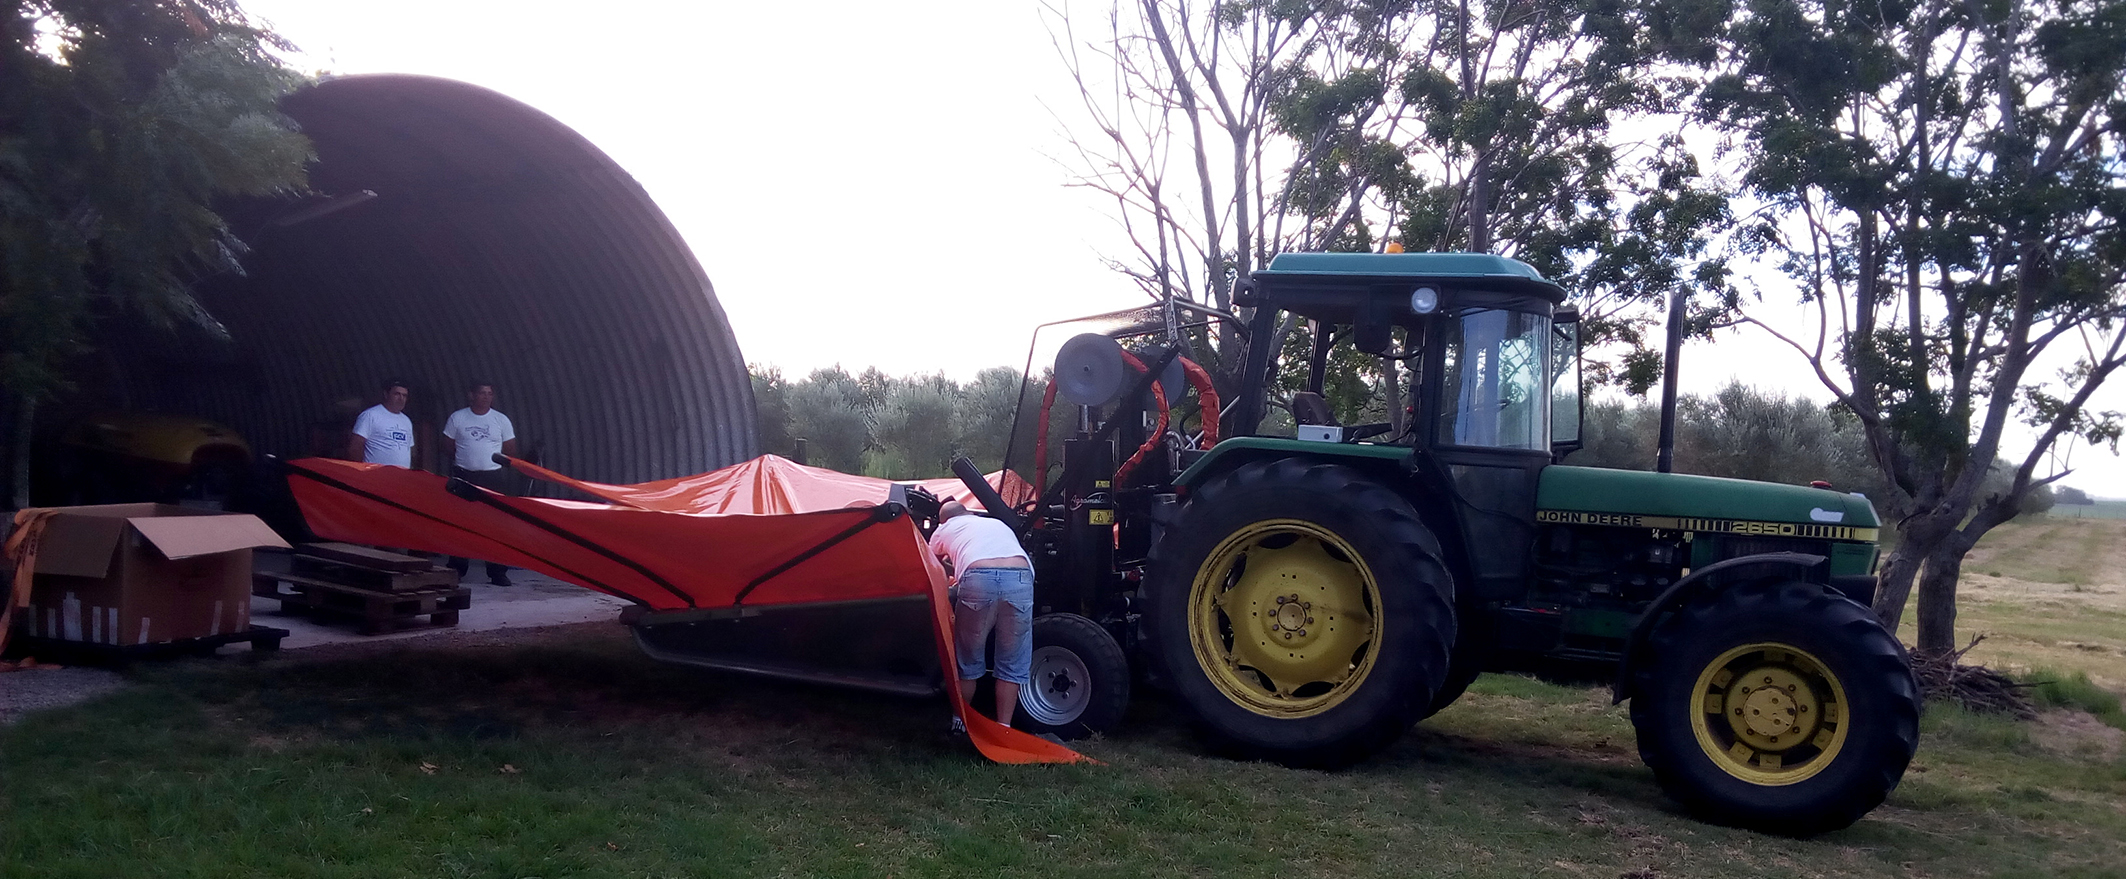 collecting_equipments_of_harvesting_in_uruguay